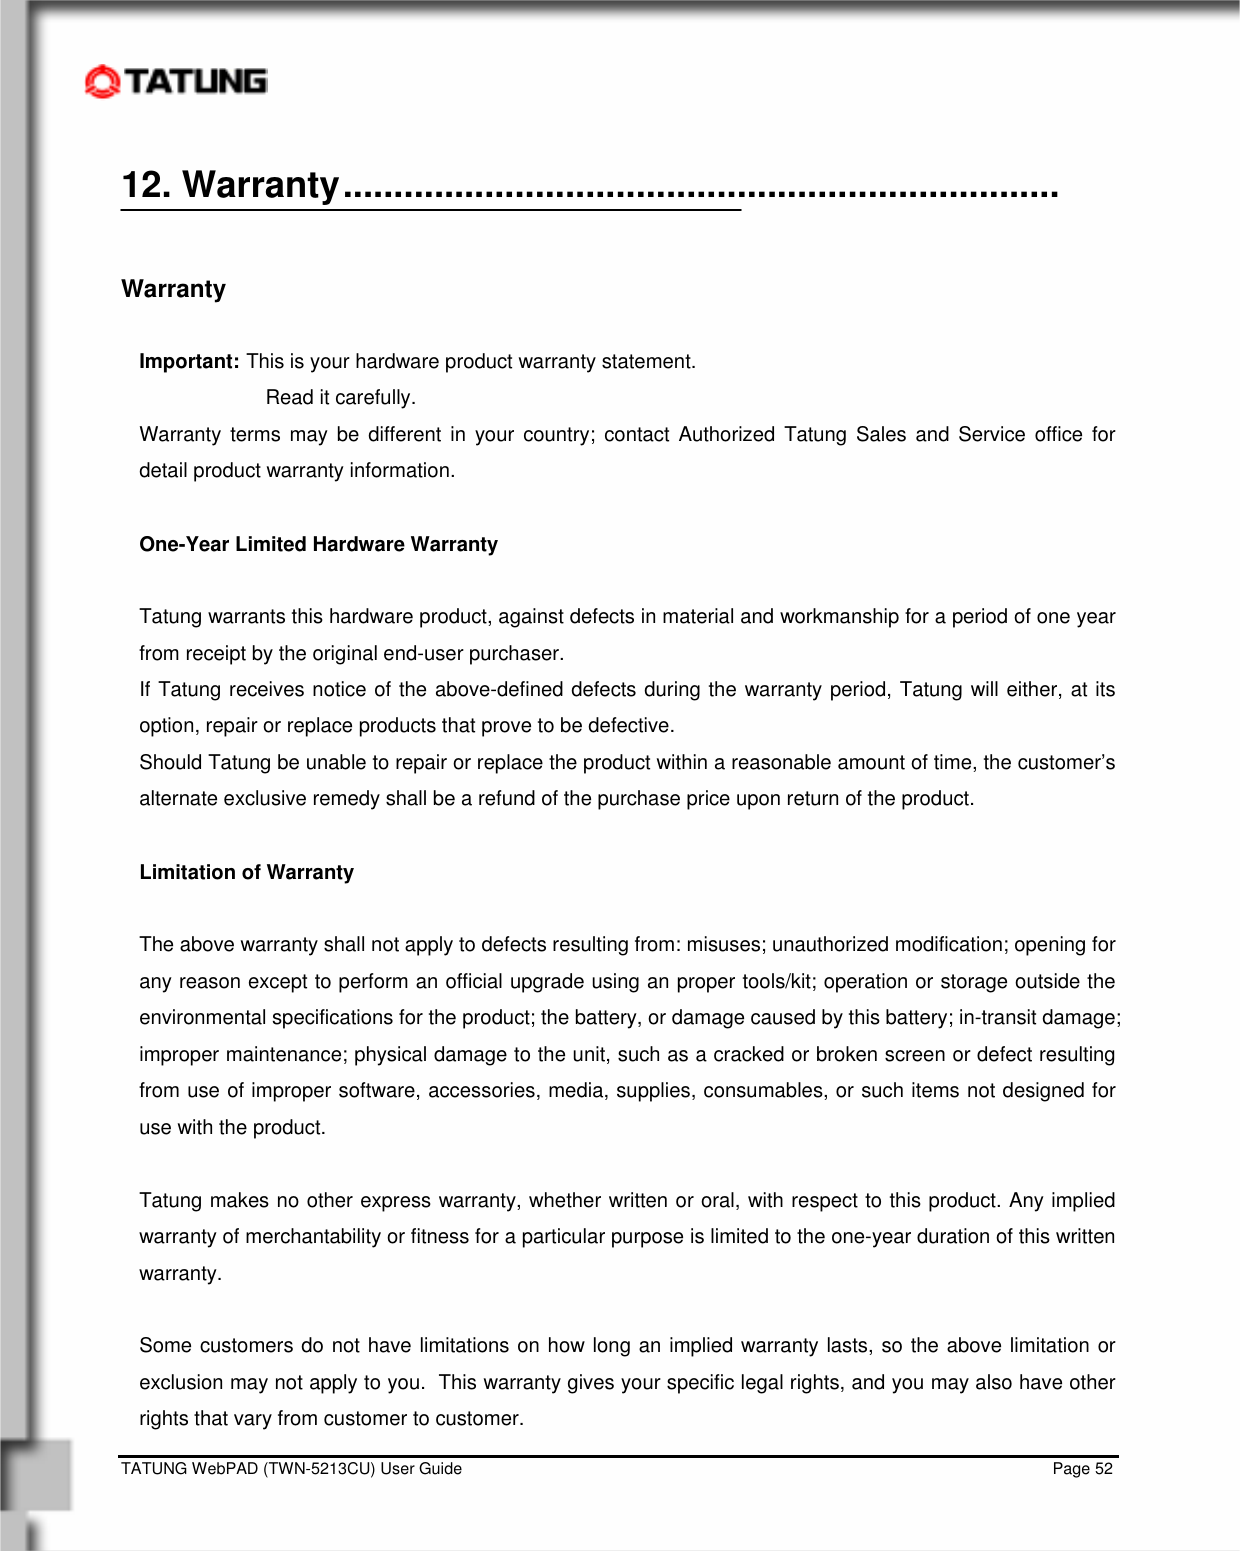    TATUNG WebPAD (TWN-5213CU) User Guide                                                                                                                                   Page 52 12. Warranty.......................................................................   Warranty  Important: This is your hardware product warranty statement.    Read it carefully. Warranty terms may be different in your country; contact Authorized Tatung Sales and Service office for detail product warranty information.  One-Year Limited Hardware Warranty  Tatung warrants this hardware product, against defects in material and workmanship for a period of one year from receipt by the original end-user purchaser. If Tatung receives notice of the above-defined defects during the warranty period, Tatung will either, at its option, repair or replace products that prove to be defective. Should Tatung be unable to repair or replace the product within a reasonable amount of time, the customer’s alternate exclusive remedy shall be a refund of the purchase price upon return of the product.  Limitation of Warranty  The above warranty shall not apply to defects resulting from: misuses; unauthorized modification; opening for any reason except to perform an official upgrade using an proper tools/kit; operation or storage outside the environmental specifications for the product; the battery, or damage caused by this battery; in-transit damage; improper maintenance; physical damage to the unit, such as a cracked or broken screen or defect resulting from use of improper software, accessories, media, supplies, consumables, or such items not designed for use with the product.   Tatung makes no other express warranty, whether written or oral, with respect to this product. Any implied warranty of merchantability or fitness for a particular purpose is limited to the one-year duration of this written warranty.  Some customers do not have limitations on how long an implied warranty lasts, so the above limitation or exclusion may not apply to you.  This warranty gives your specific legal rights, and you may also have other rights that vary from customer to customer. 